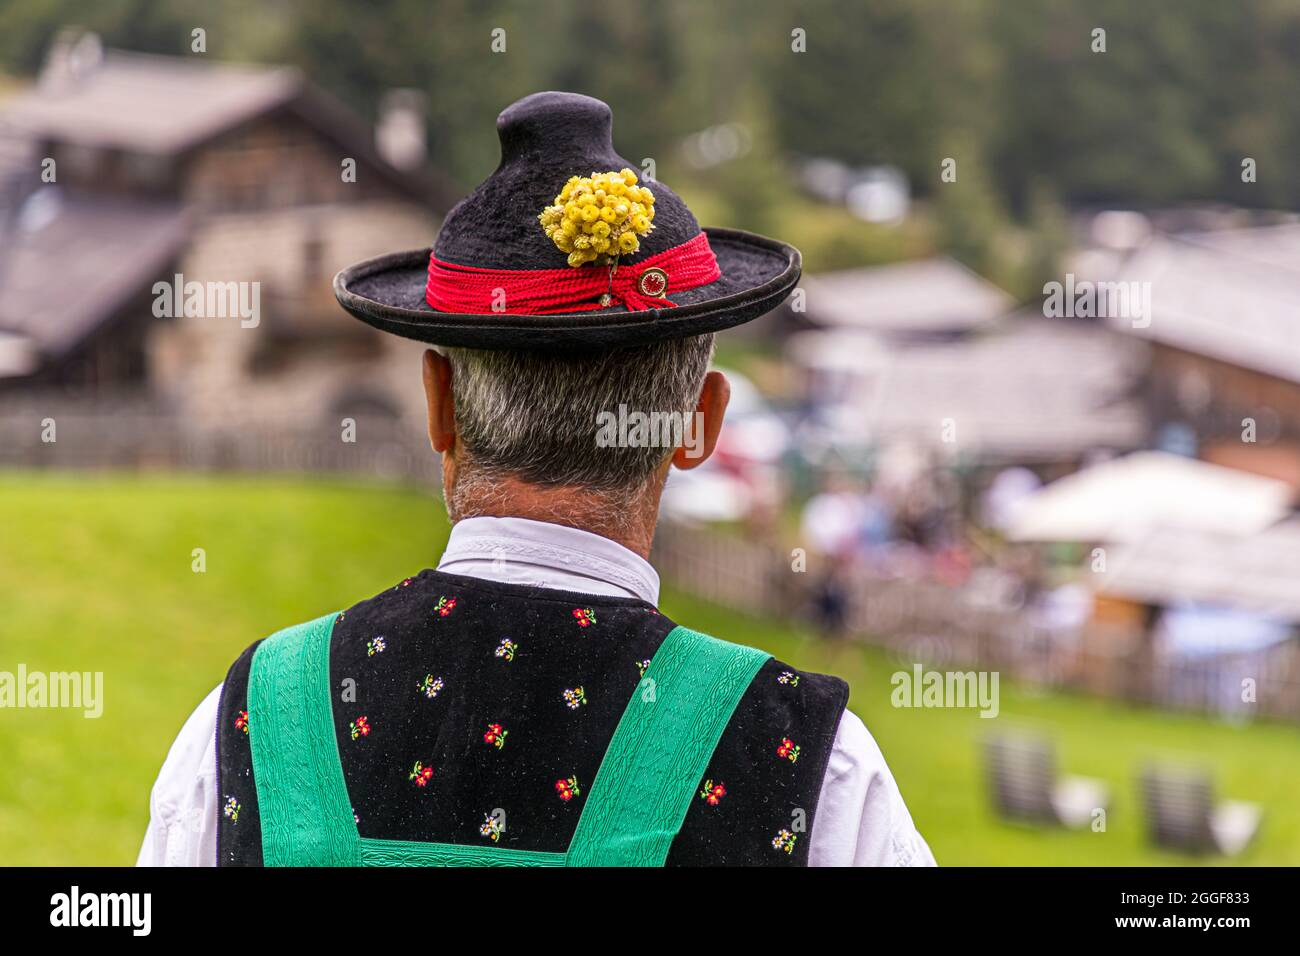 Decorated traditional costume hat of an alphorn blower on the Gompm alp in South Tyrol. Unplugged Taste is the name of the gourmet event at the Gompm-Alm in South Tyrol, Italy. It takes place every year on the last Sunday in August. Alphorns belong to the hearty folklore Stock Photo